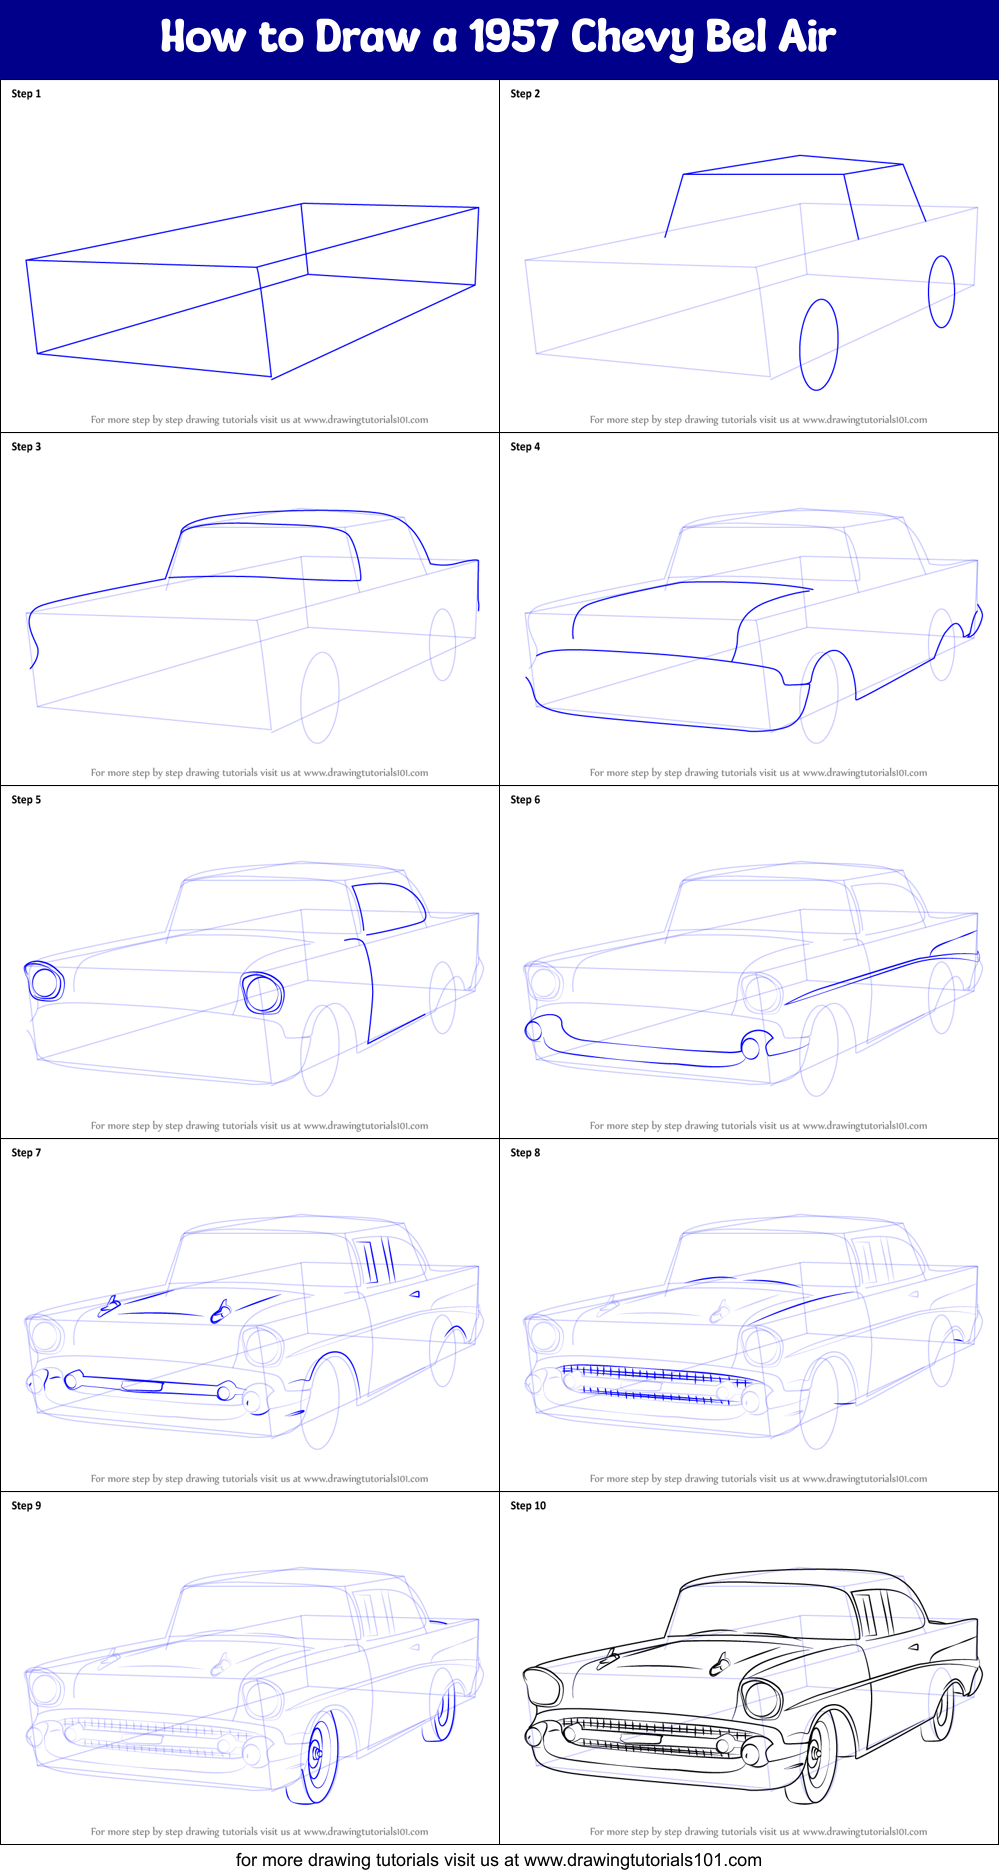 How to Draw a 1957 Chevy Bel Air printable step by step drawing sheet